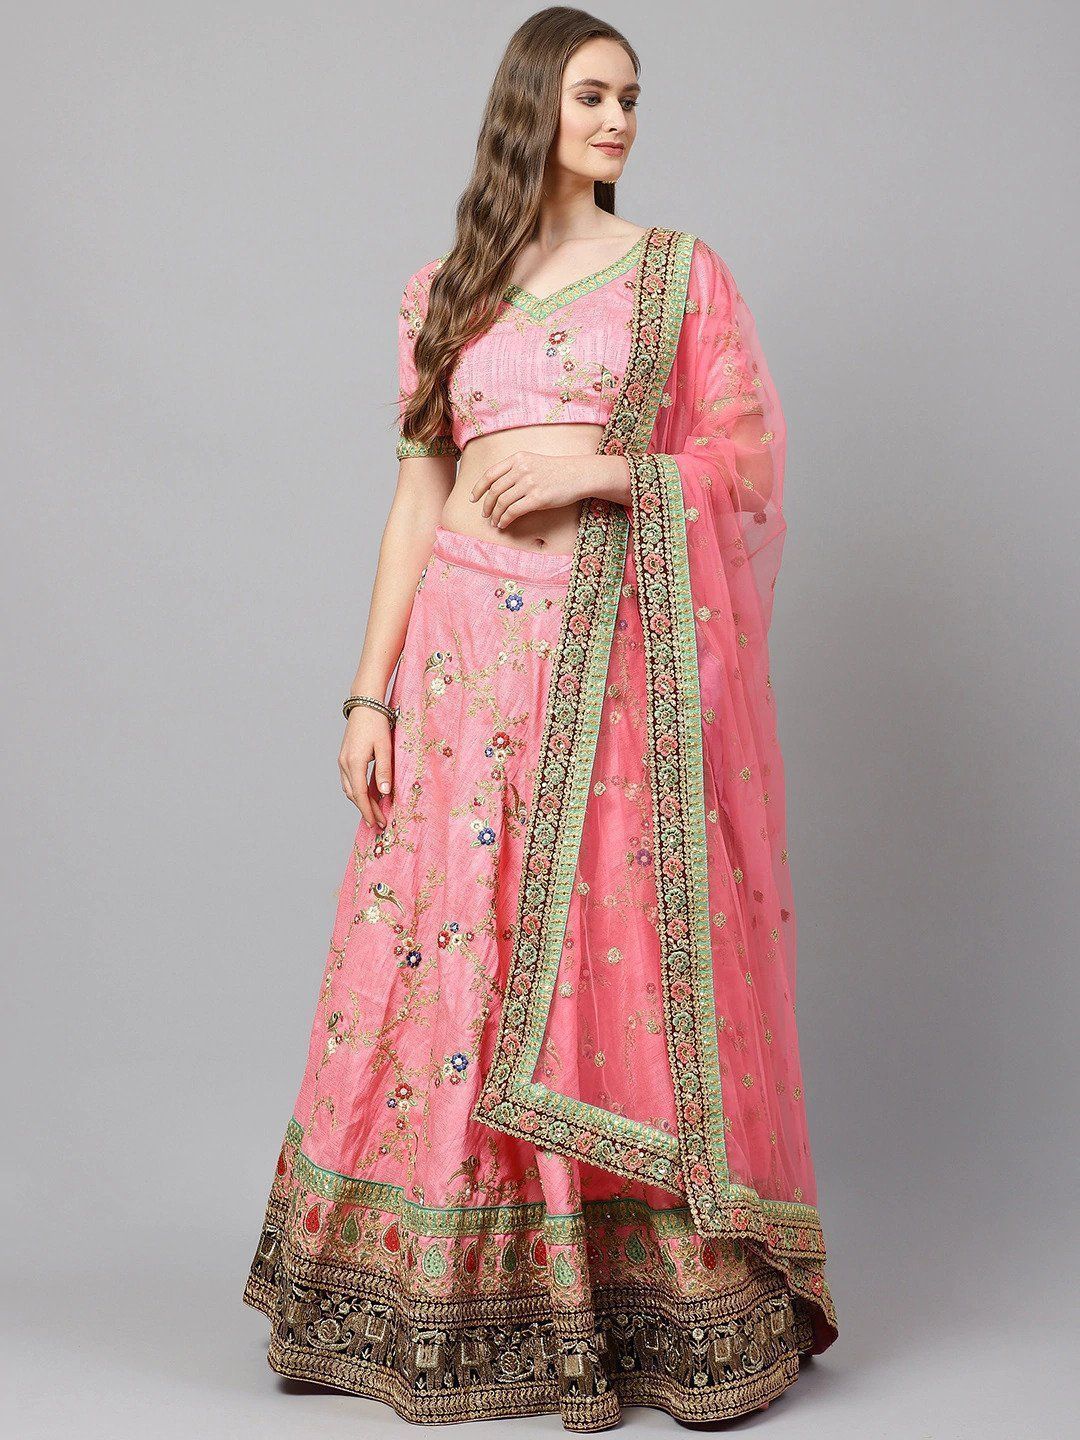 PPink & Green Embroidered Semi-Stitched Myntra Lehenga & Unstitched Blouse with Dupatta